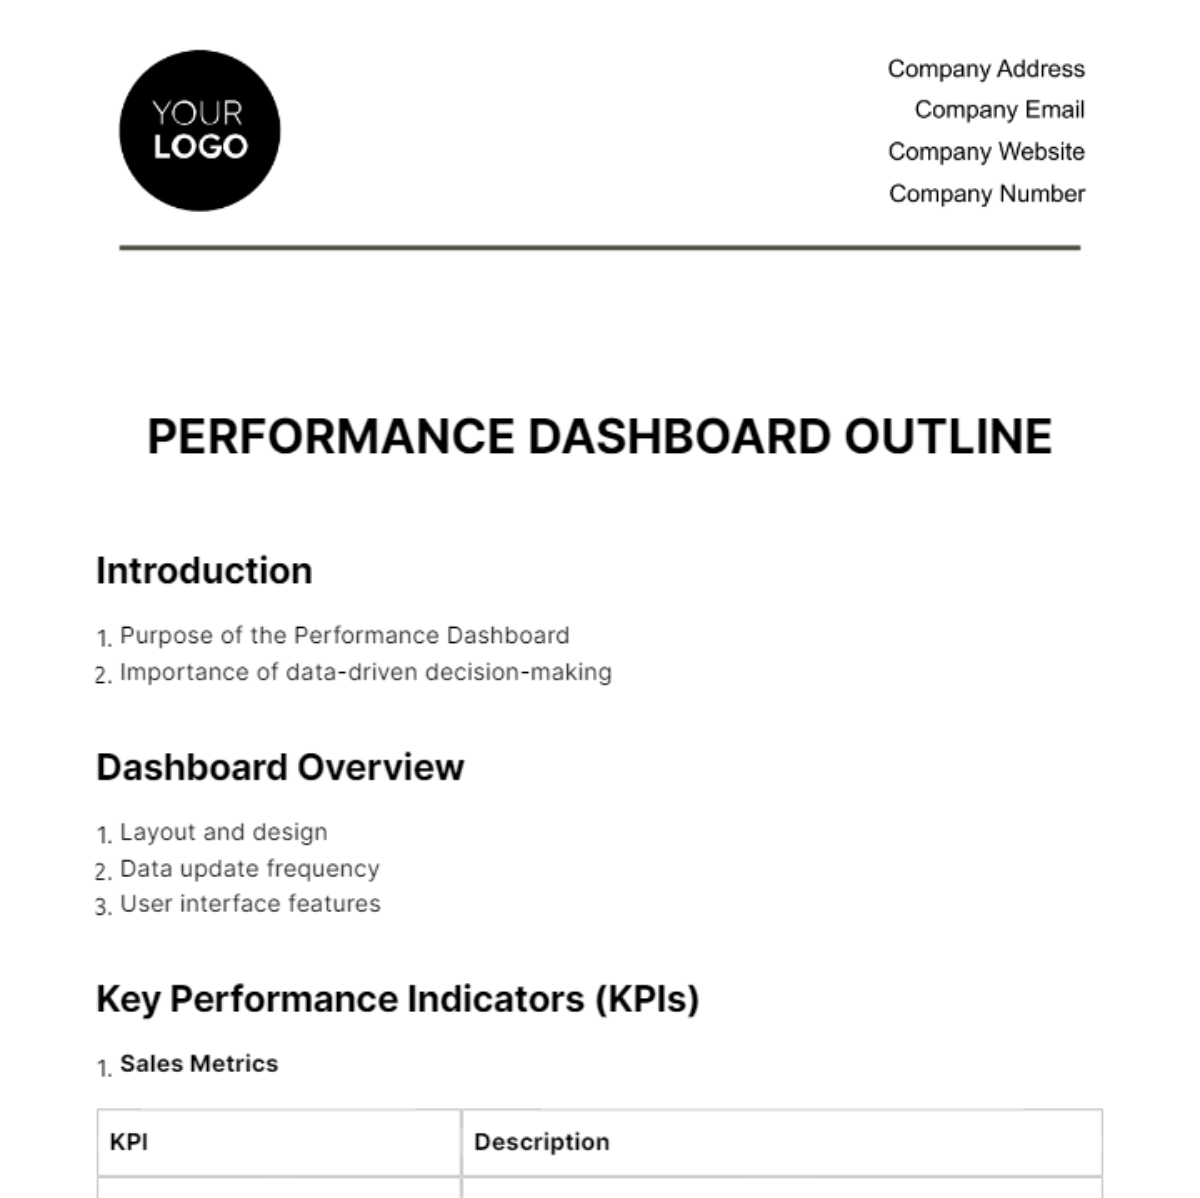 Free Performance Dashboard Outline HR Template